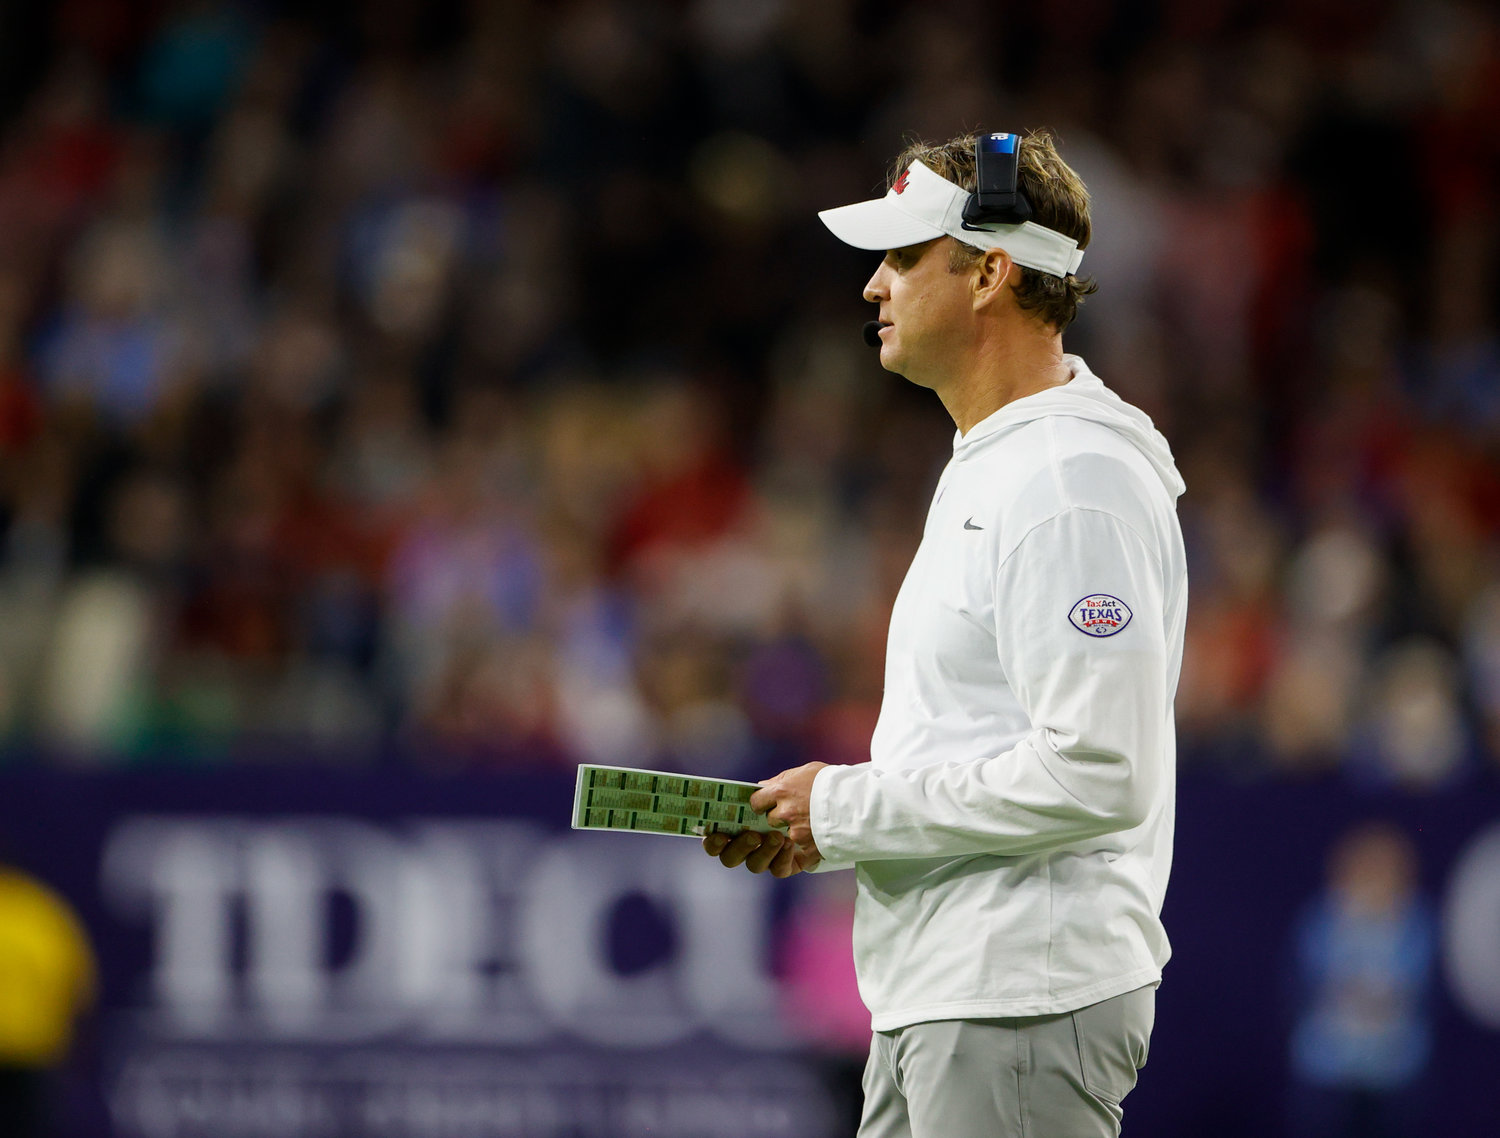 Mississippi head coach Lane Kiffin during the TaxAct Texas Bowl on Dec. 28, 2022 in Houston.